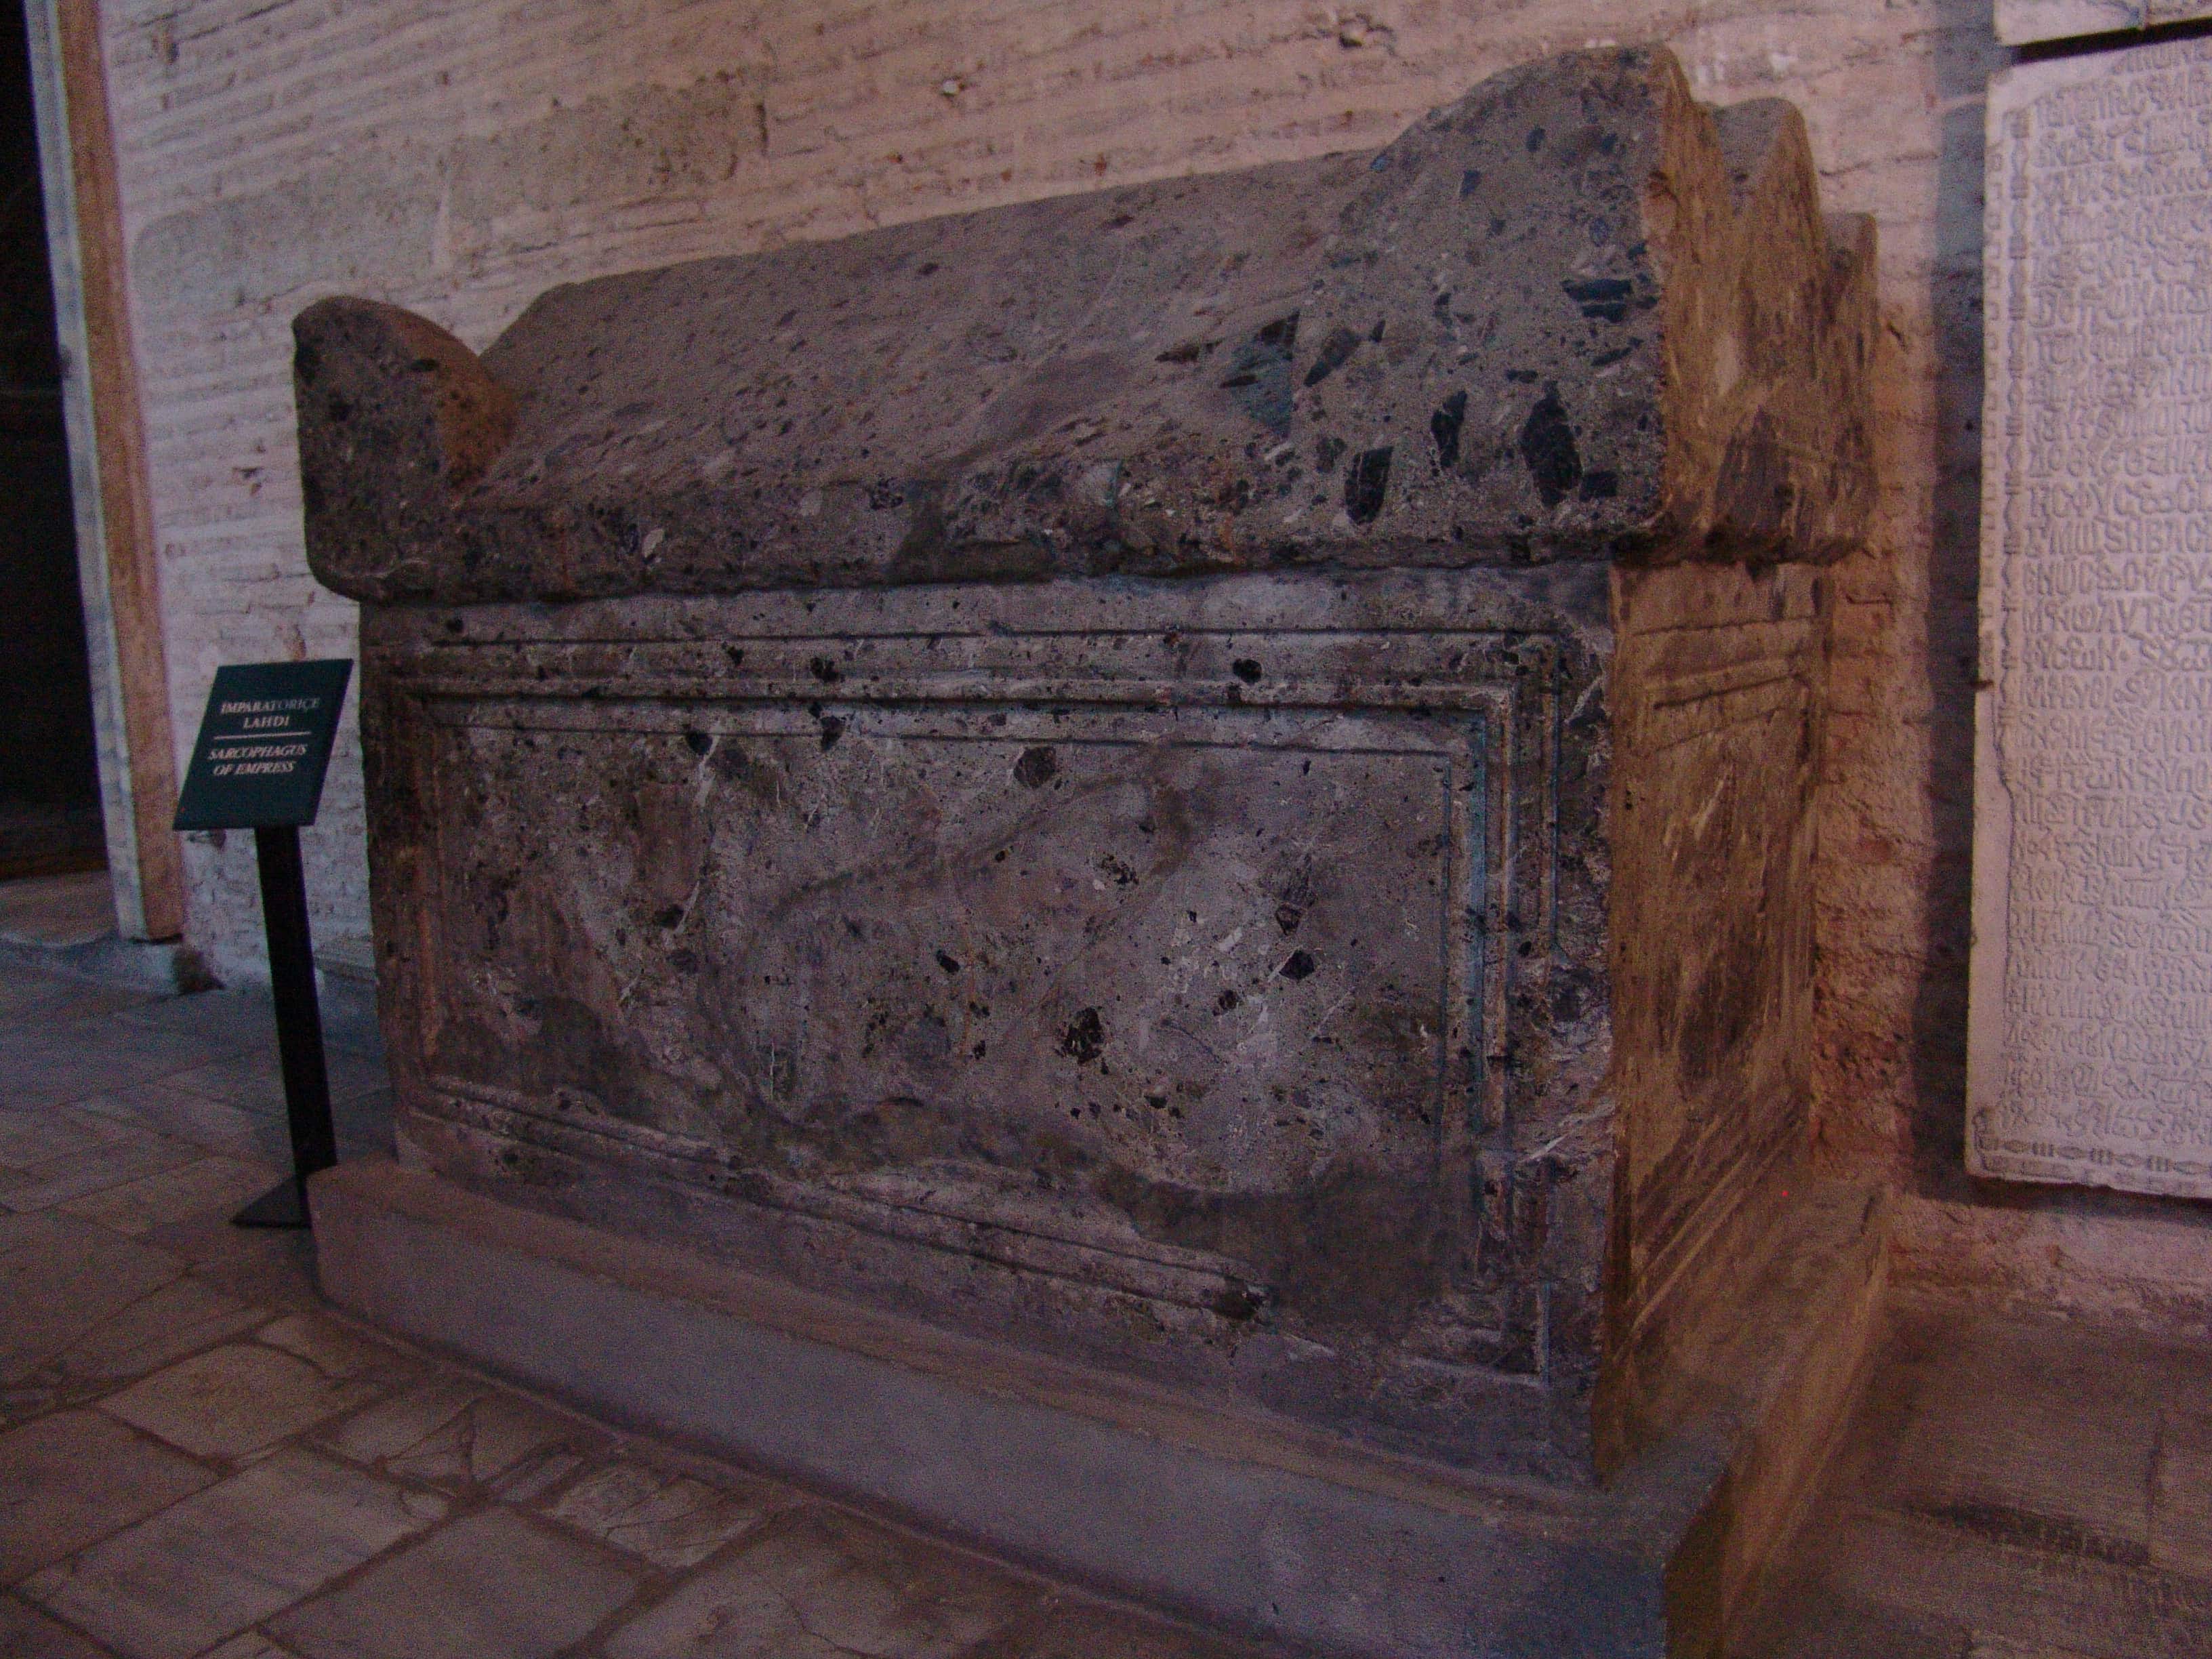 A sarcophagus used by a Byzantine empress